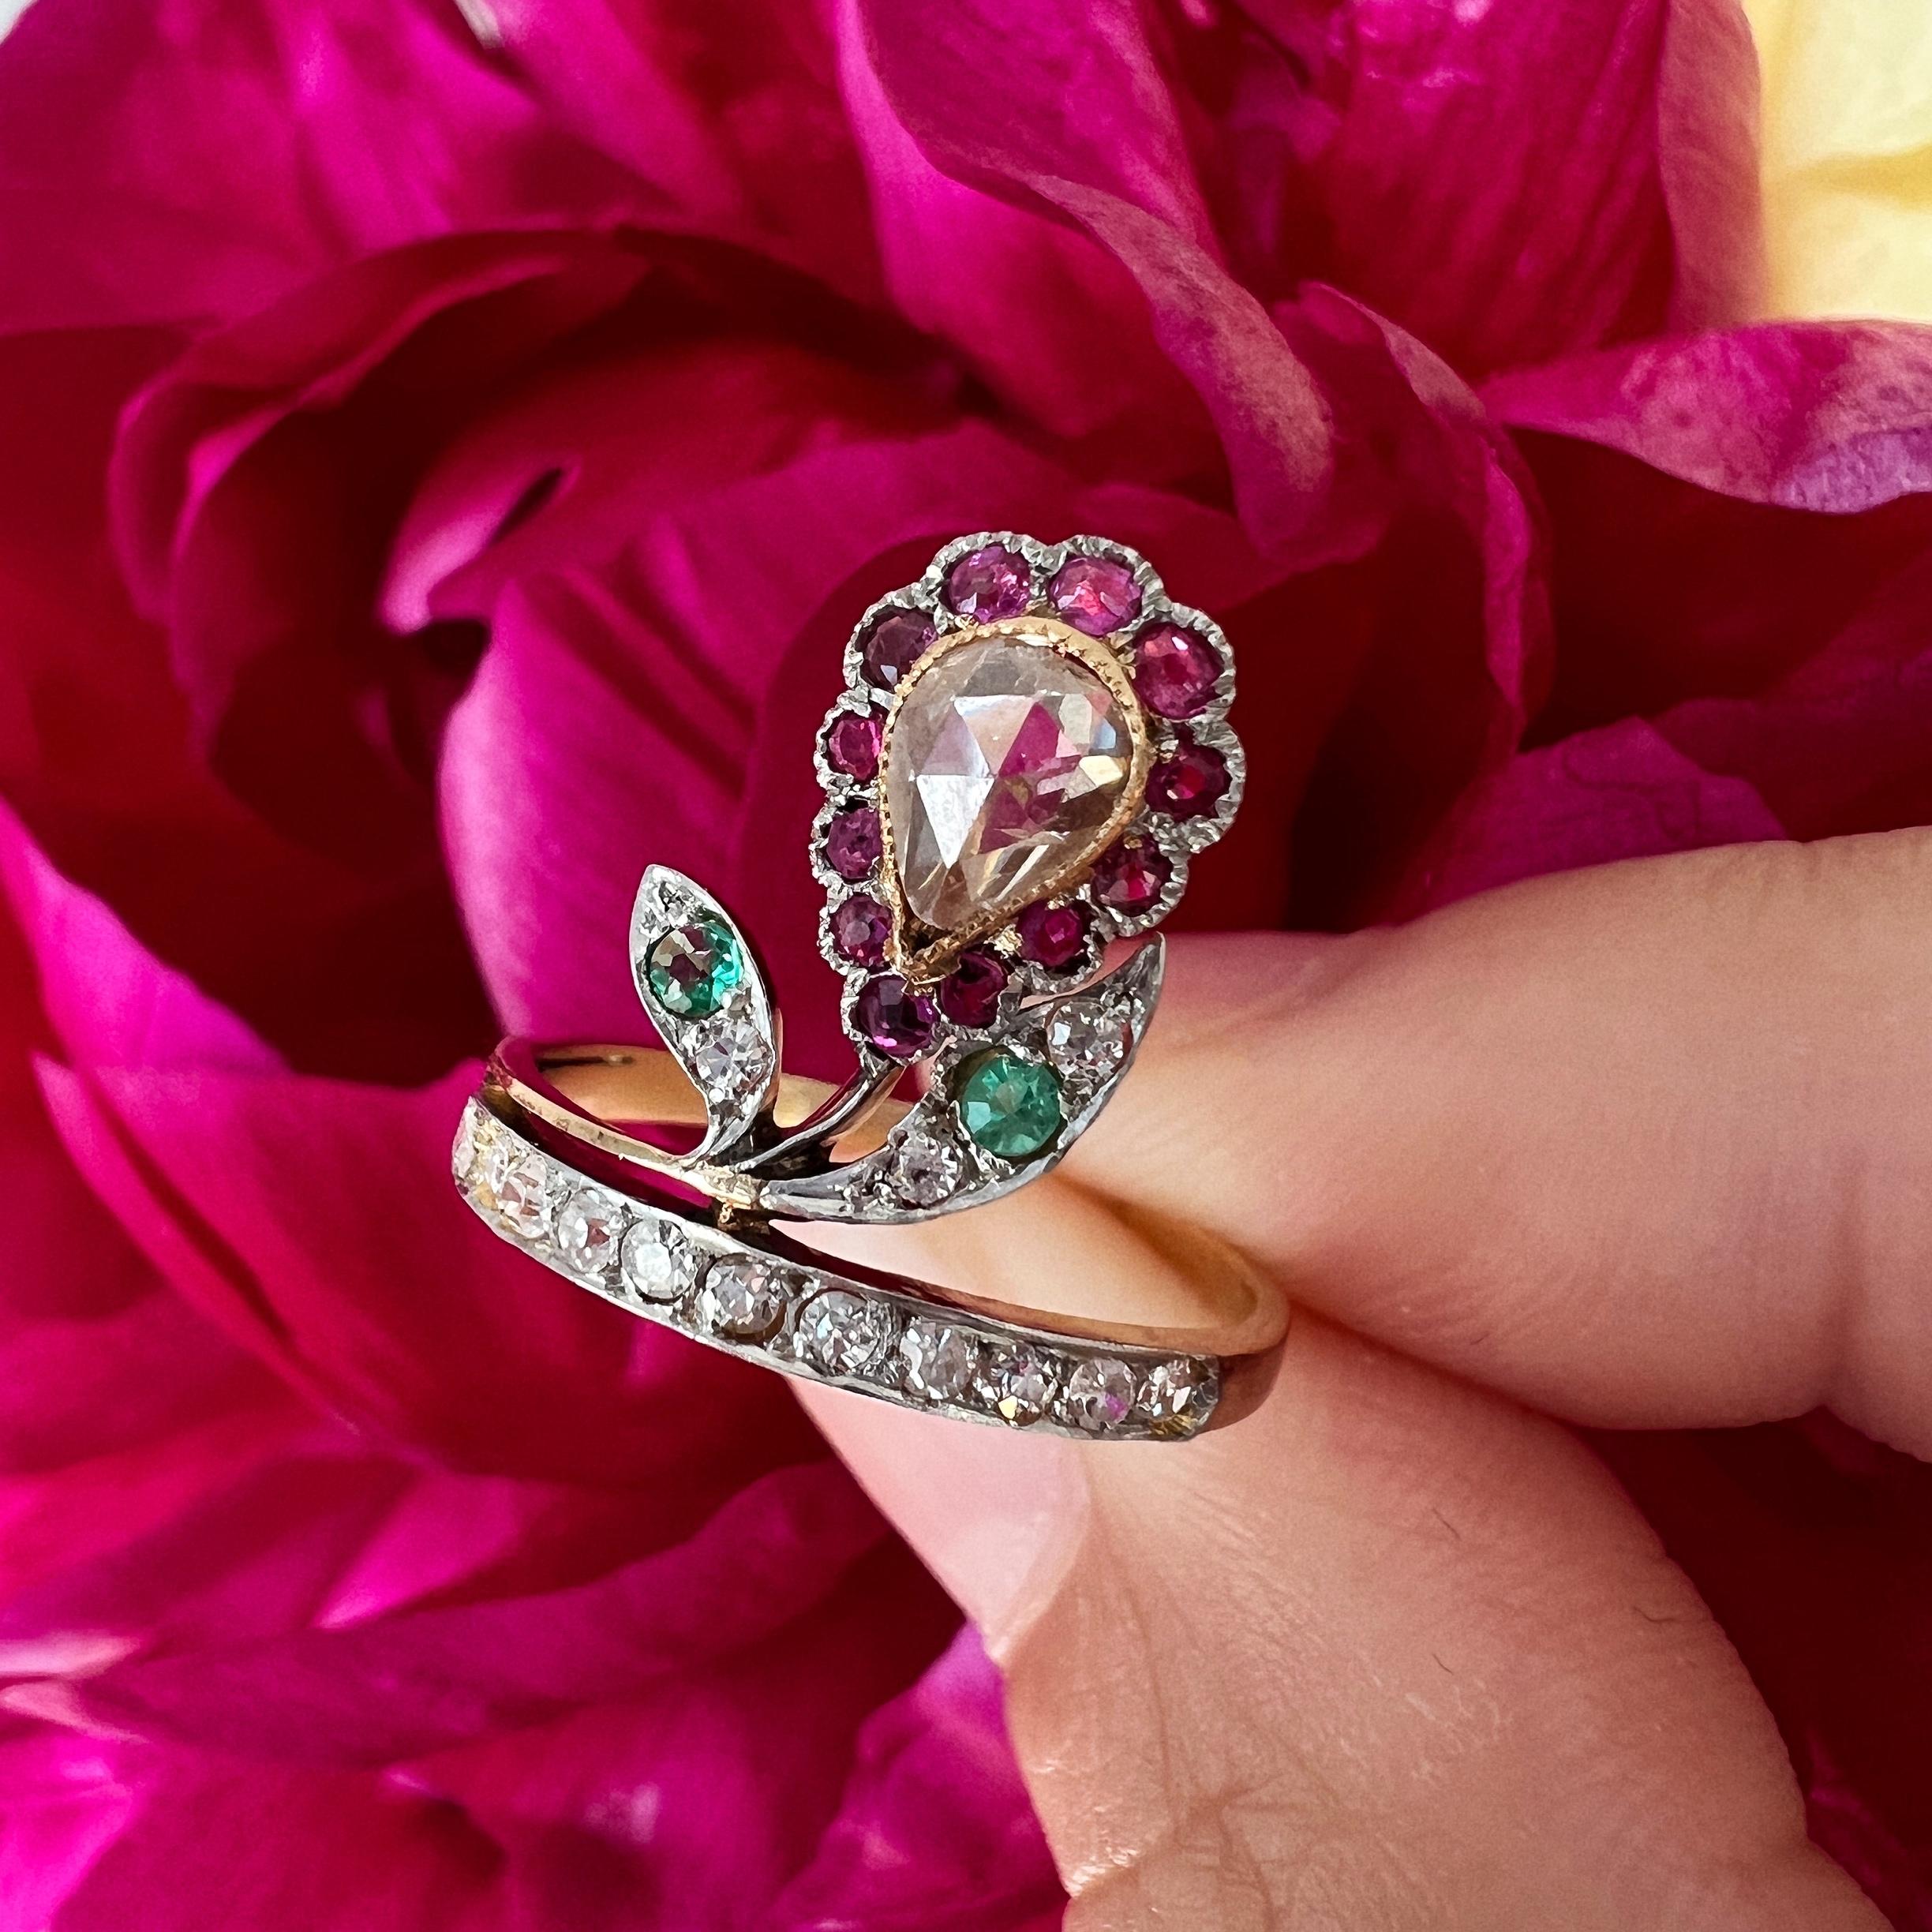 If you’ve steered clear of floral jewels in the past for fear of looking old-fashioned, this French made, lovely early 20th century diamond flower ring will definitely change your mind. This rare ring pays tribute to the delicacy of the nature by